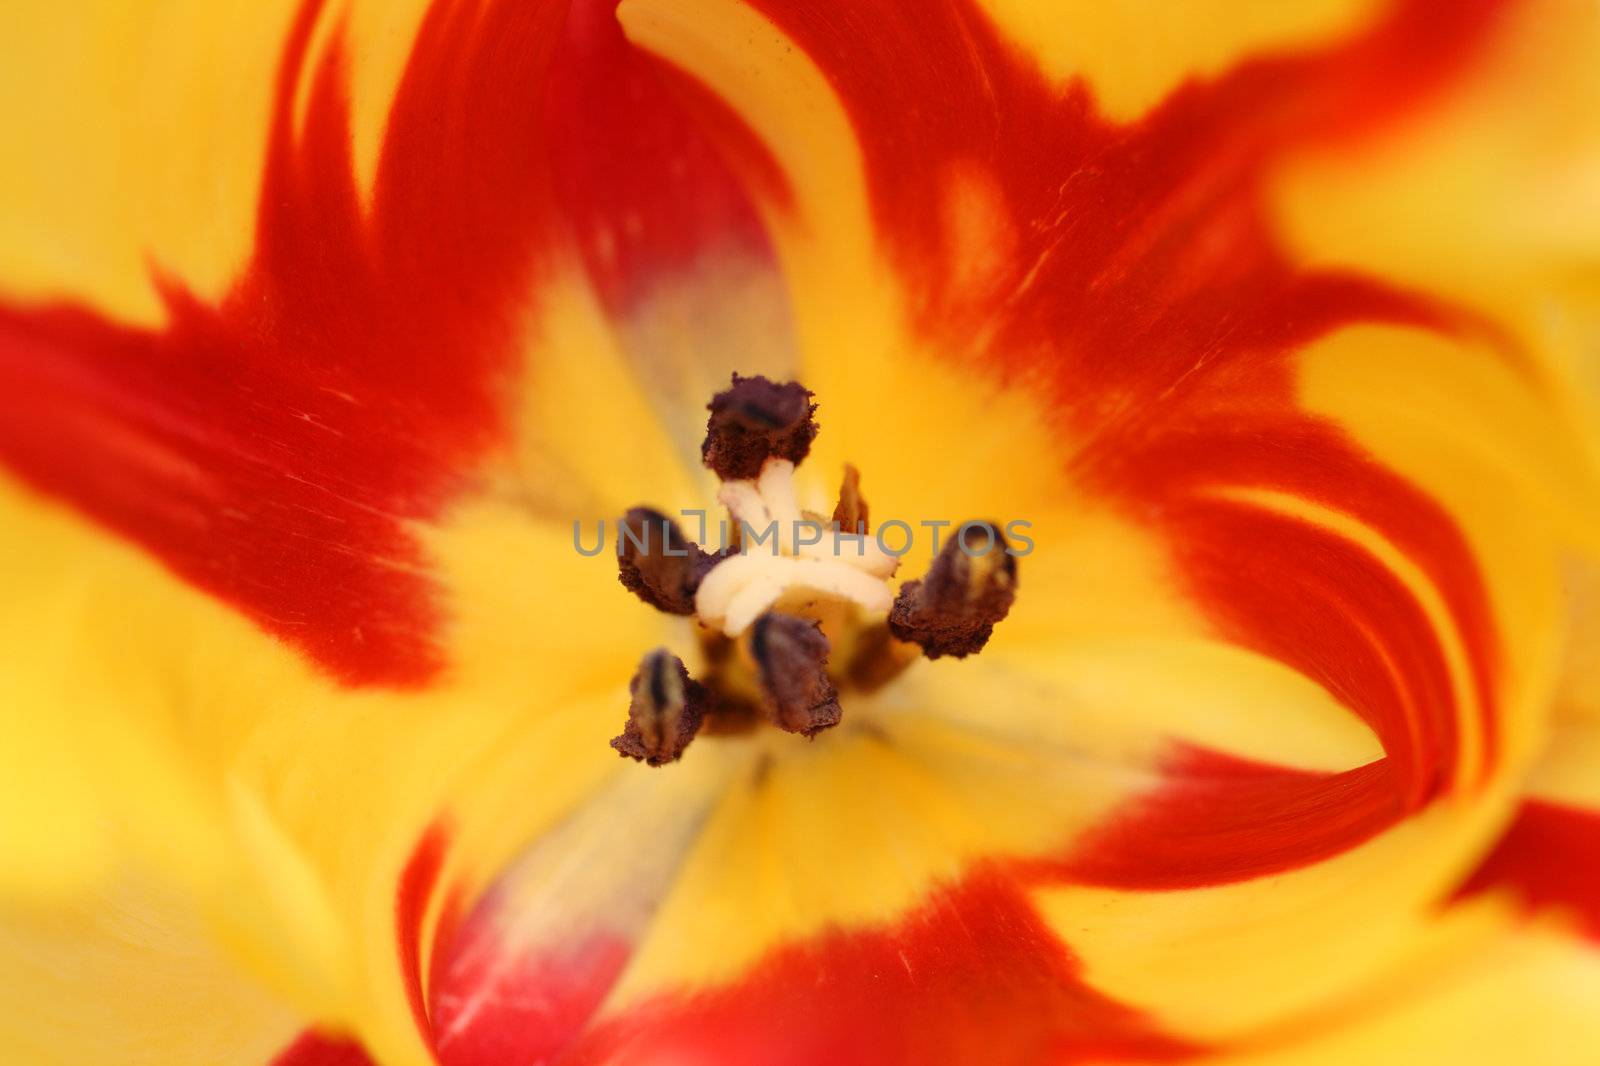 view in red-yellow striped tulip by Mikko